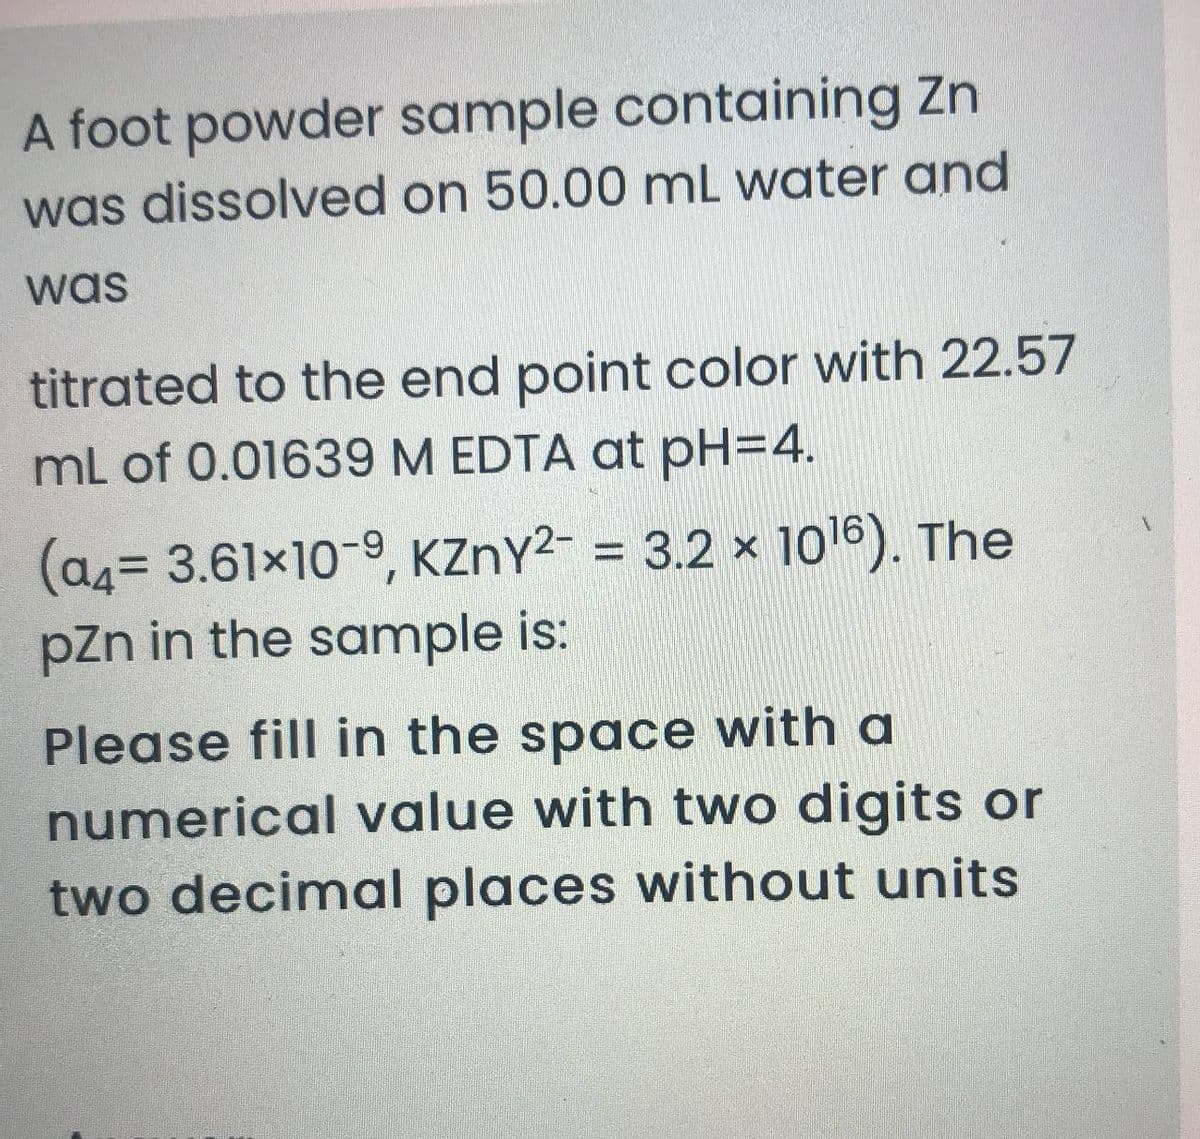 A foot powder sample containing Zn
was dissolved on 50.00 mL water and
was
titrated to the end point color with 22.57
mL of 0.01639 M EDTA at pH=4.
(a4= 3.61x10-9, KZNY2- = 3.2 × 1016). The
pZn in the sample is:
Please fill in the space with a
numerical value with two digits or
two decimal places without units
